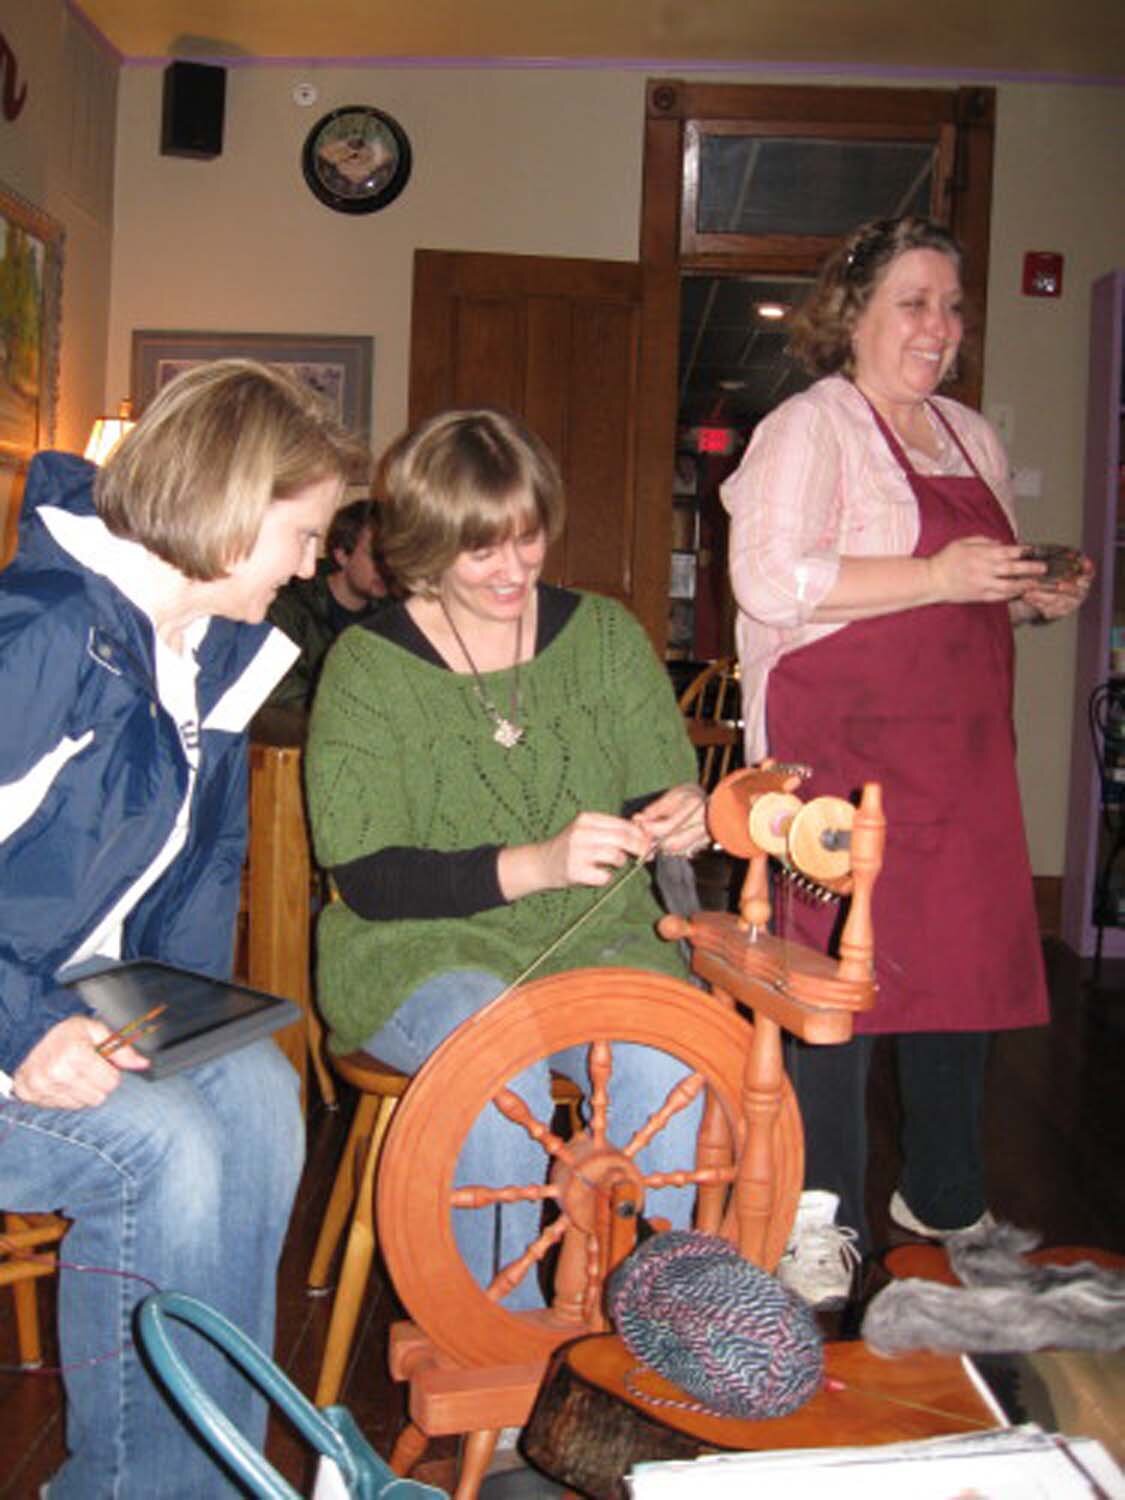 Kitty serves the knitting group.